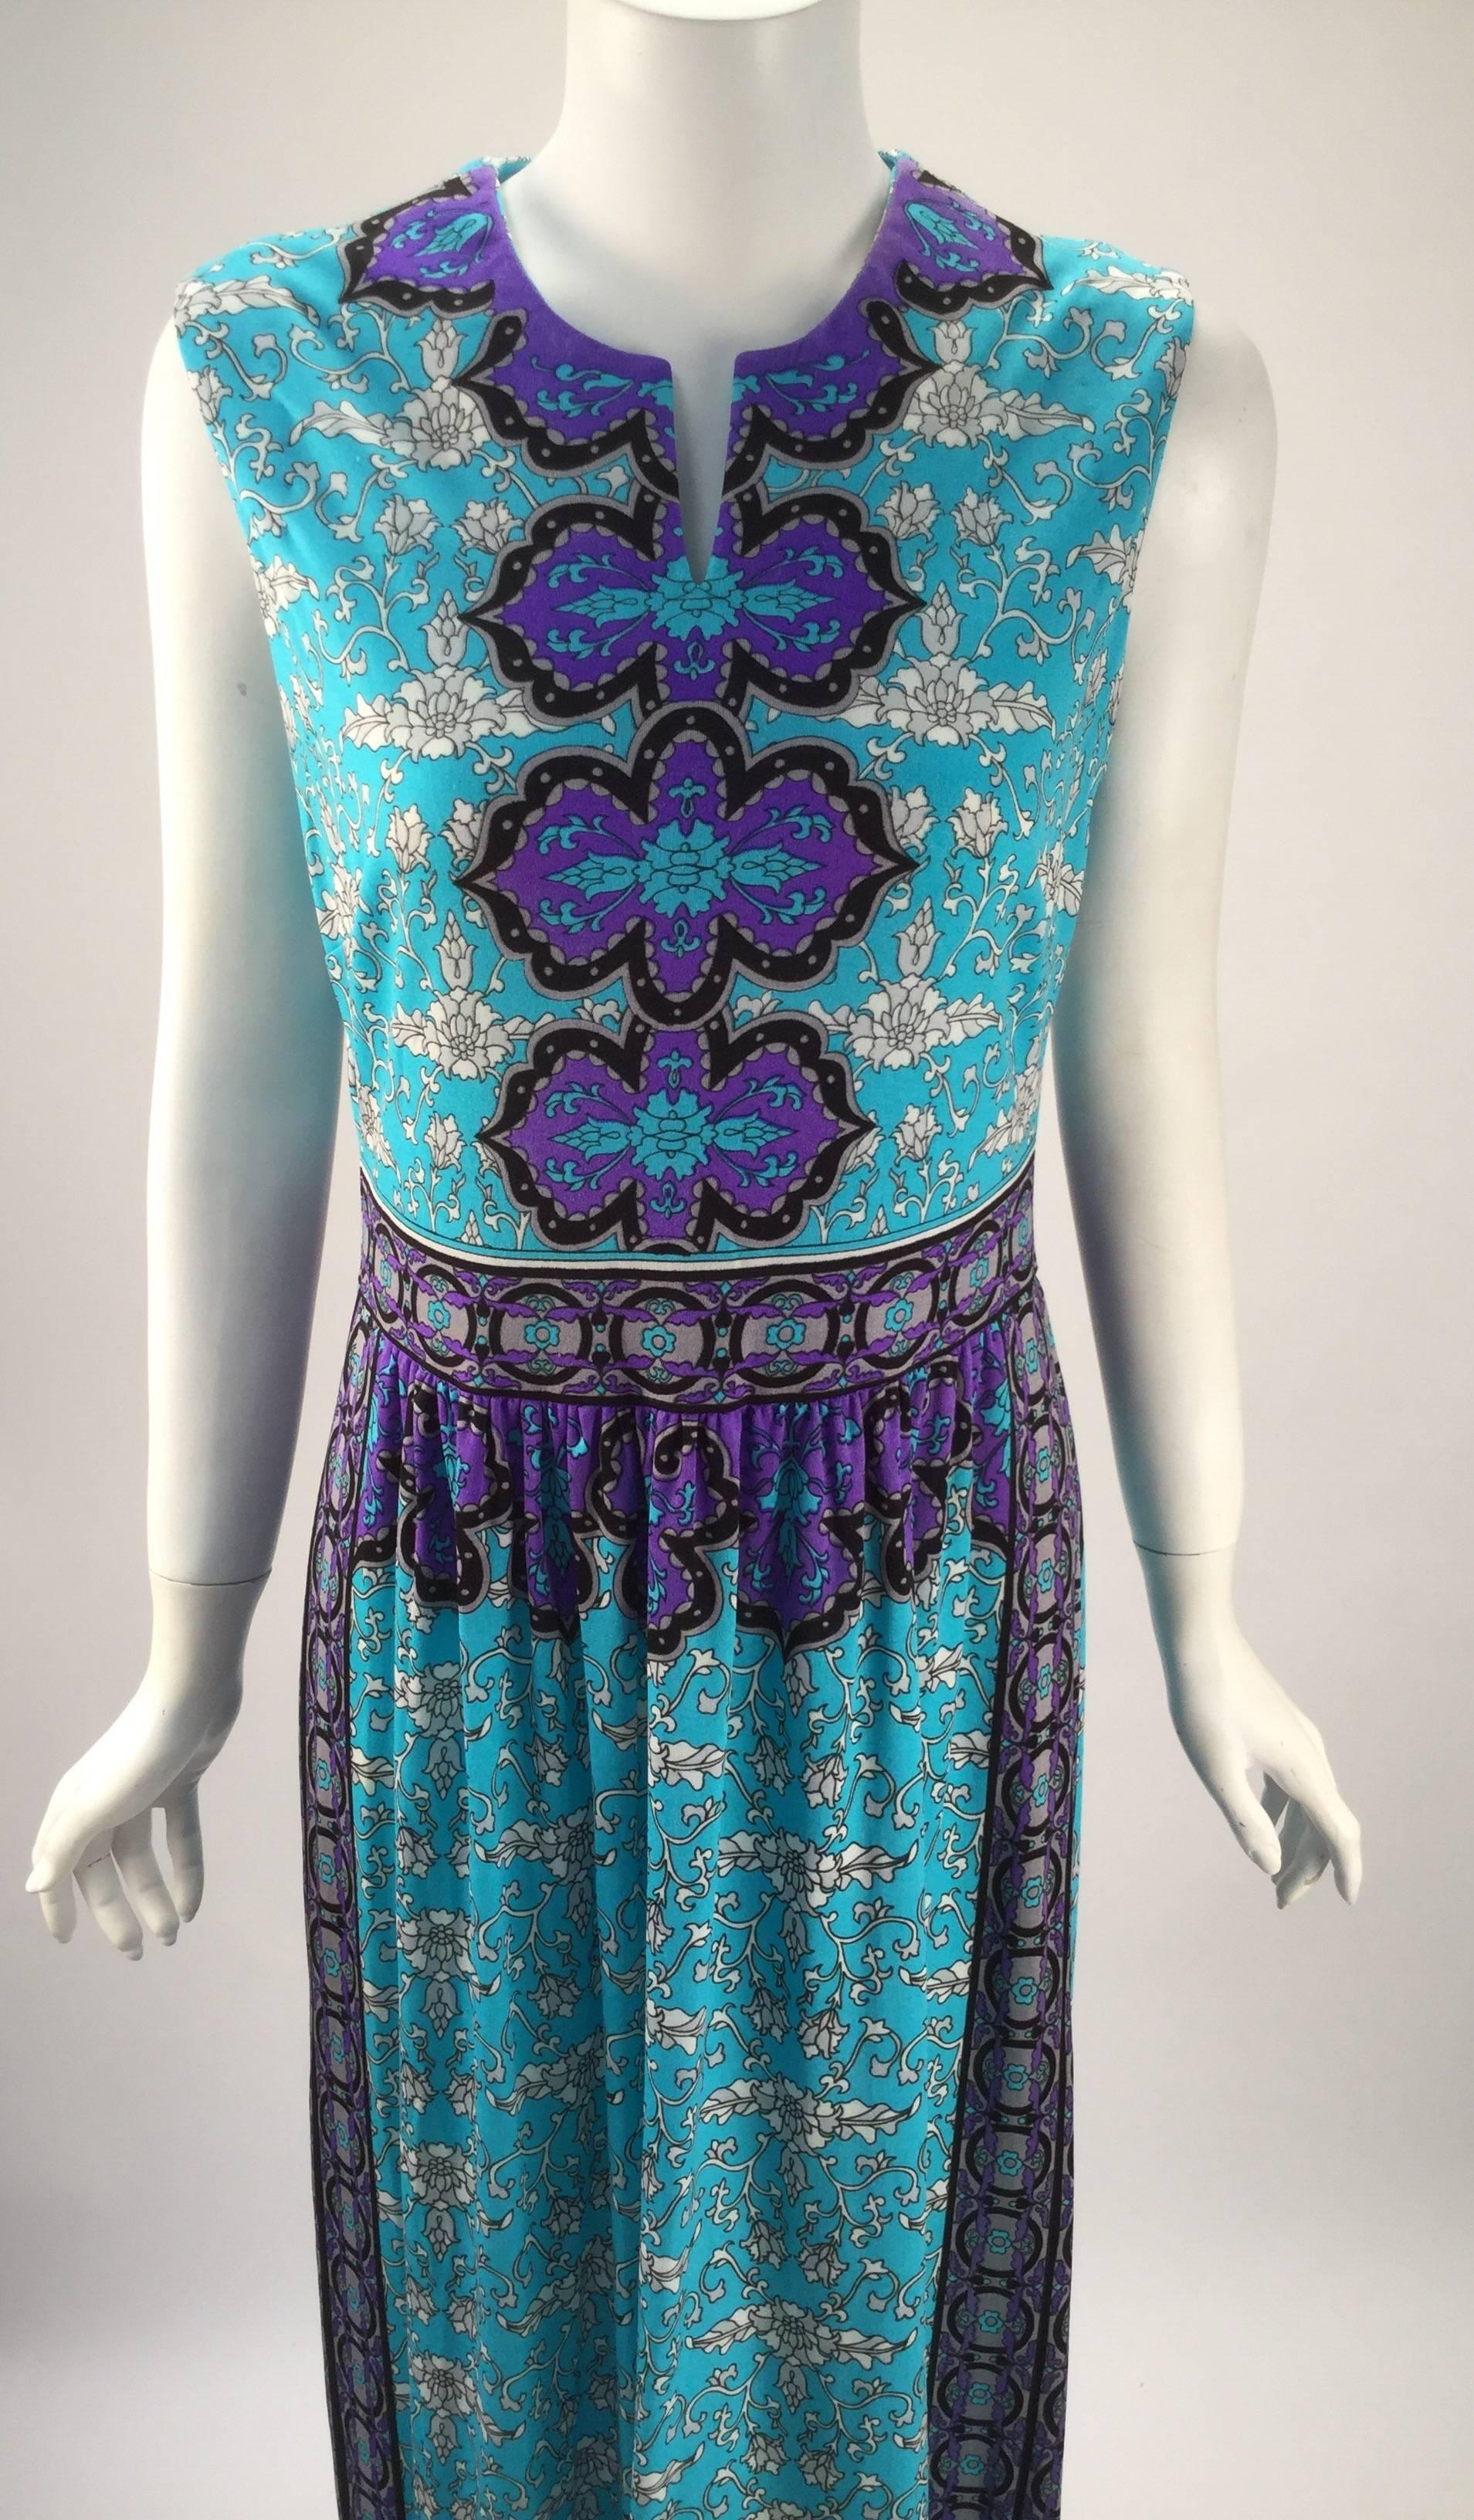 Wonderful Mr. Dino dress, perfect for summer!  Dress is bright blue with a purple, blue, white and black print all over the dress. Small v-neck. Zipper center back. Hook and eye closure.

Modern US size 6

Hem can be lengthened 2 inches

*All